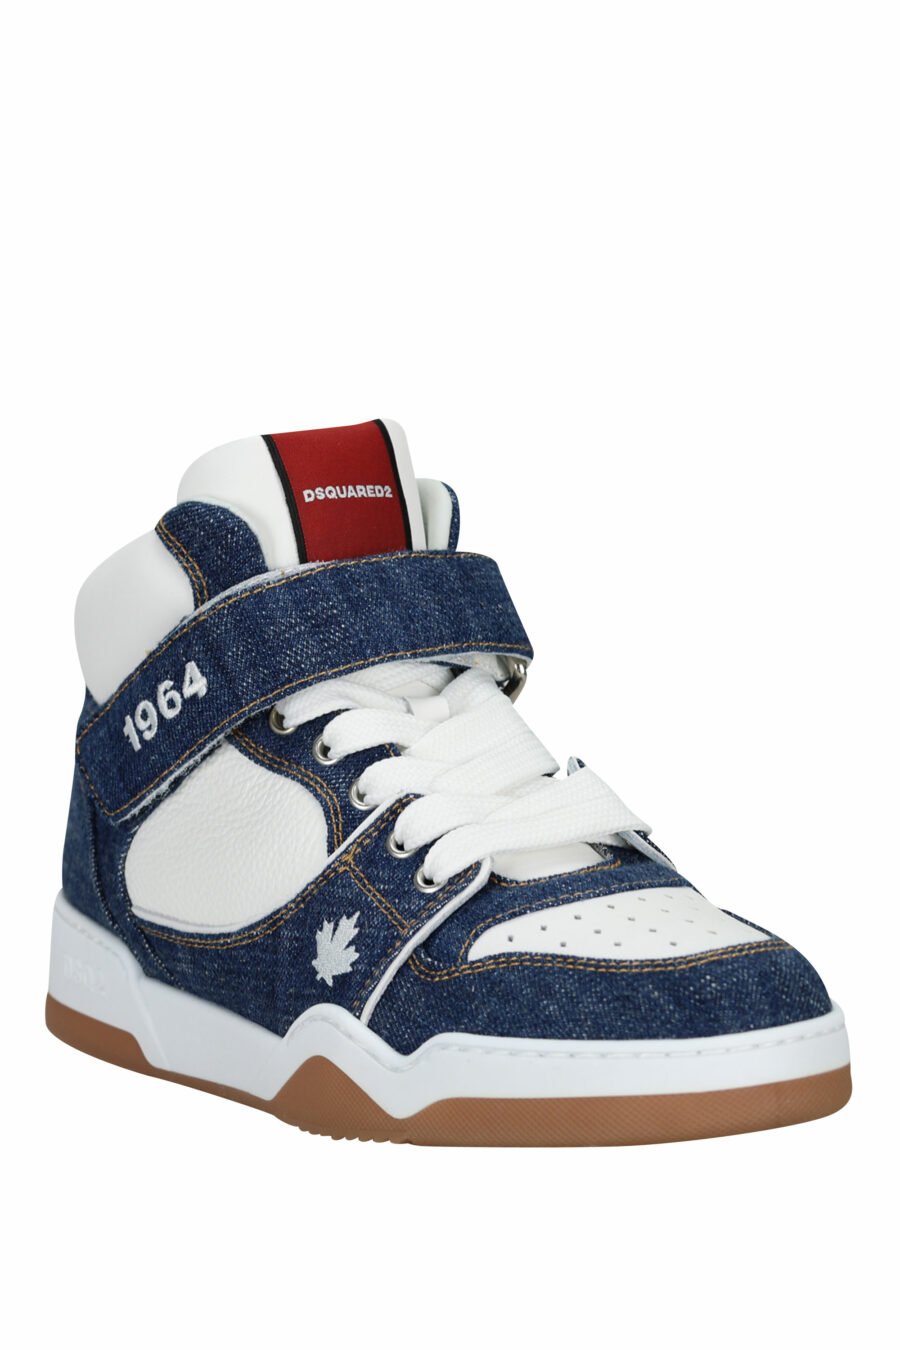 Blue denim "spyker" white high top trainers with logo - 8055777306079 1